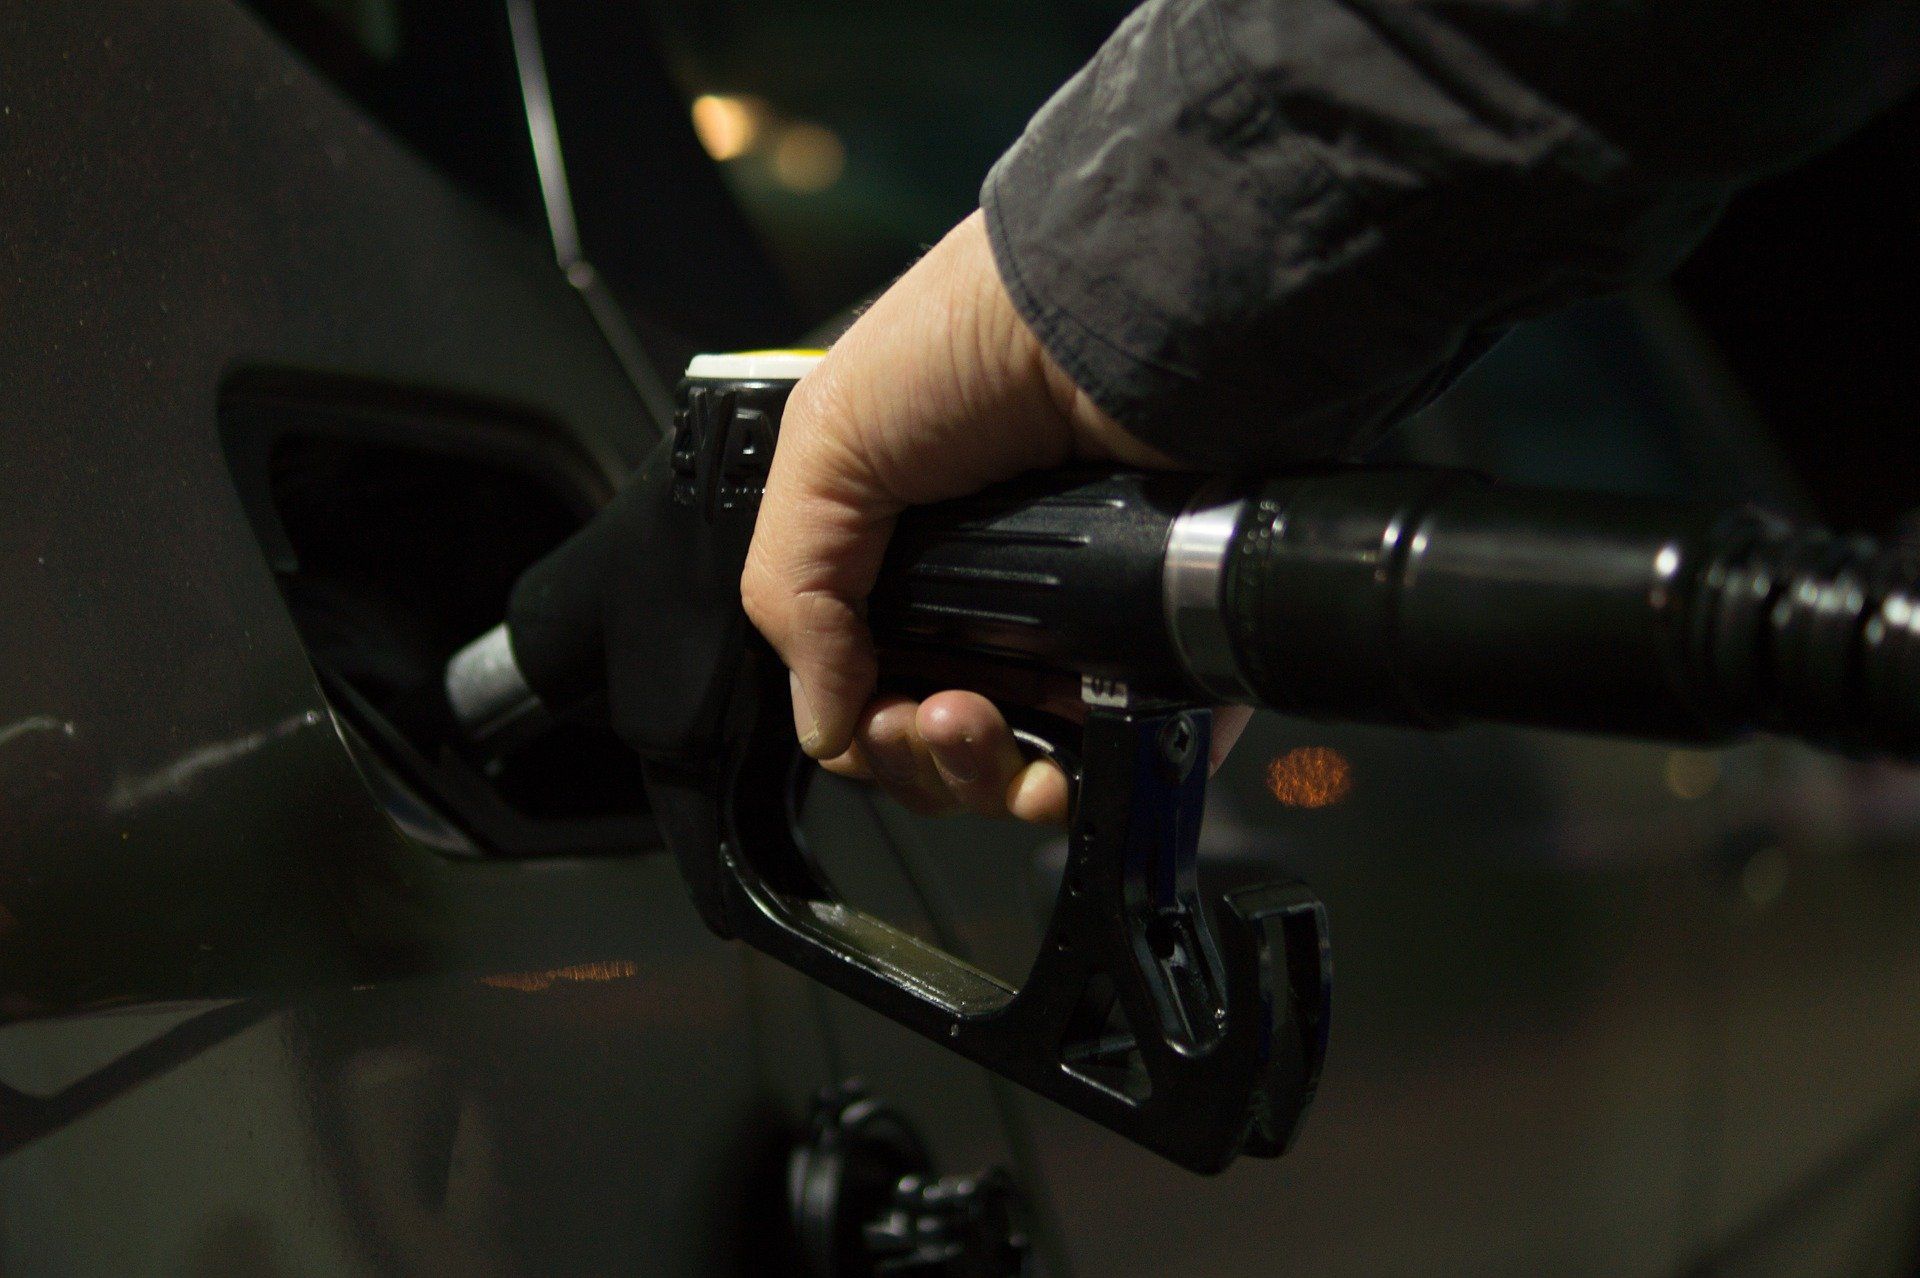 Fuel price today: Petrol and Diesel rates remain unchanged on April 7, 2022